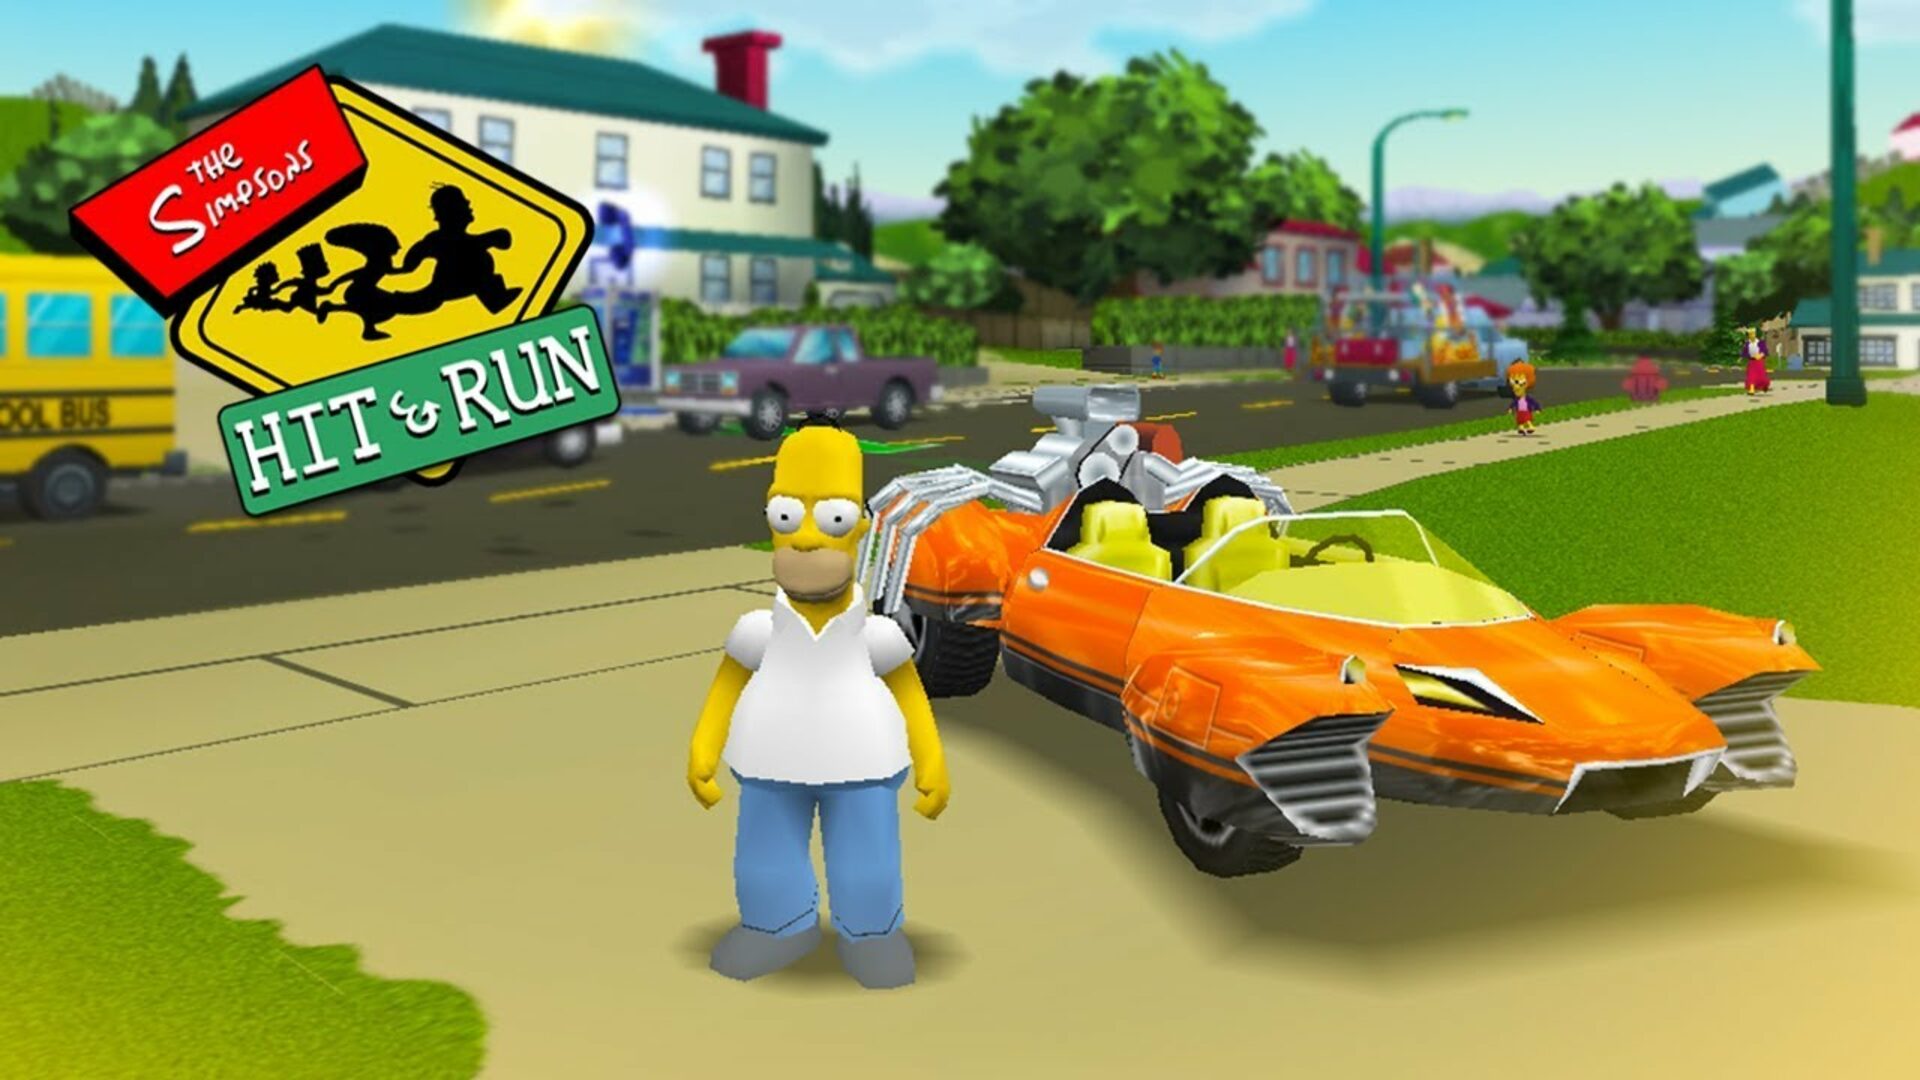 Retro Video Games That Stand Up - The Simpsons: Hit & Run